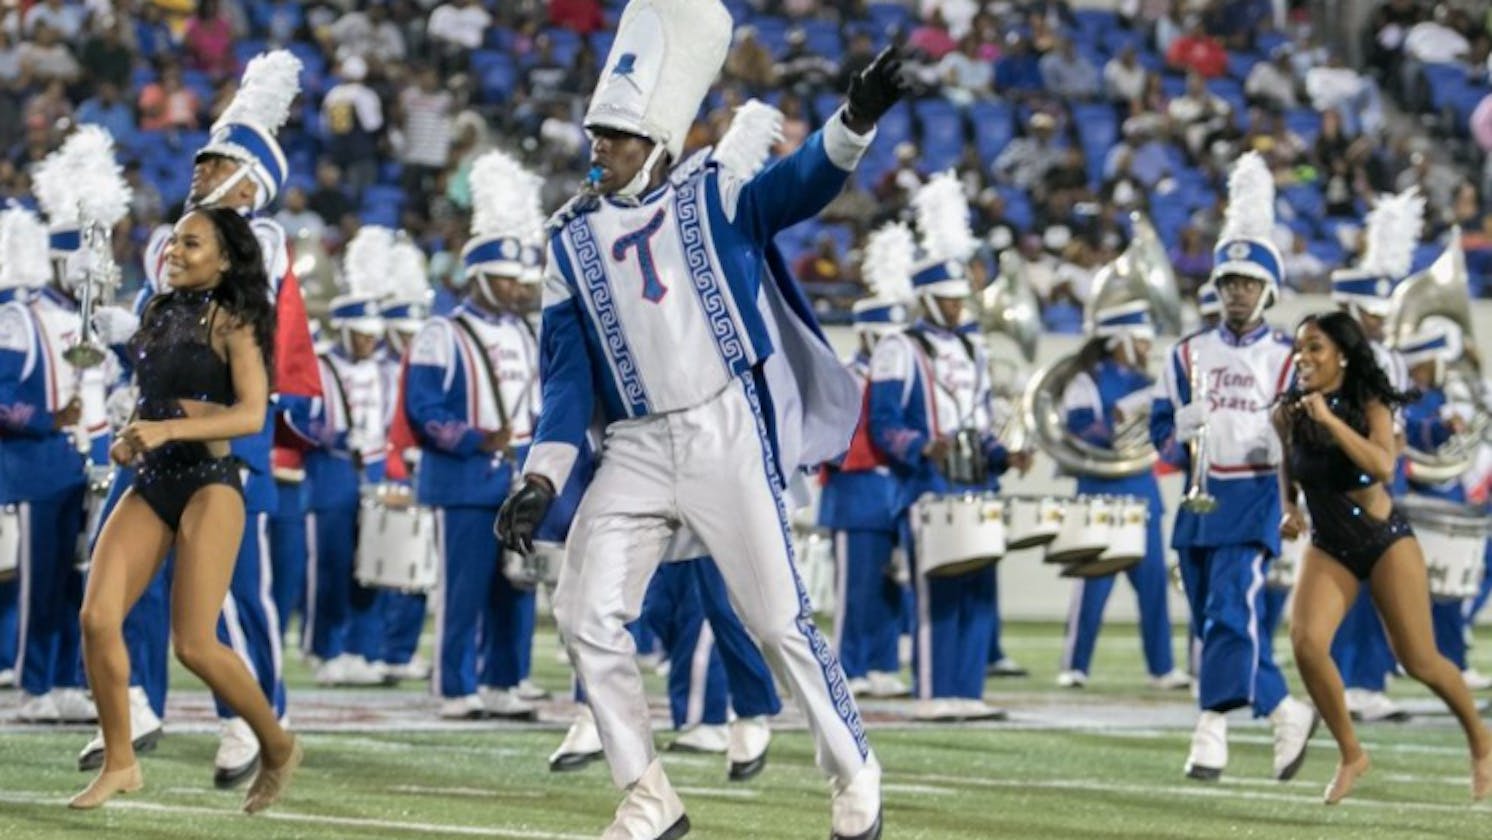 TSU's Marching Band drew attention at the 65th Grammy Awards